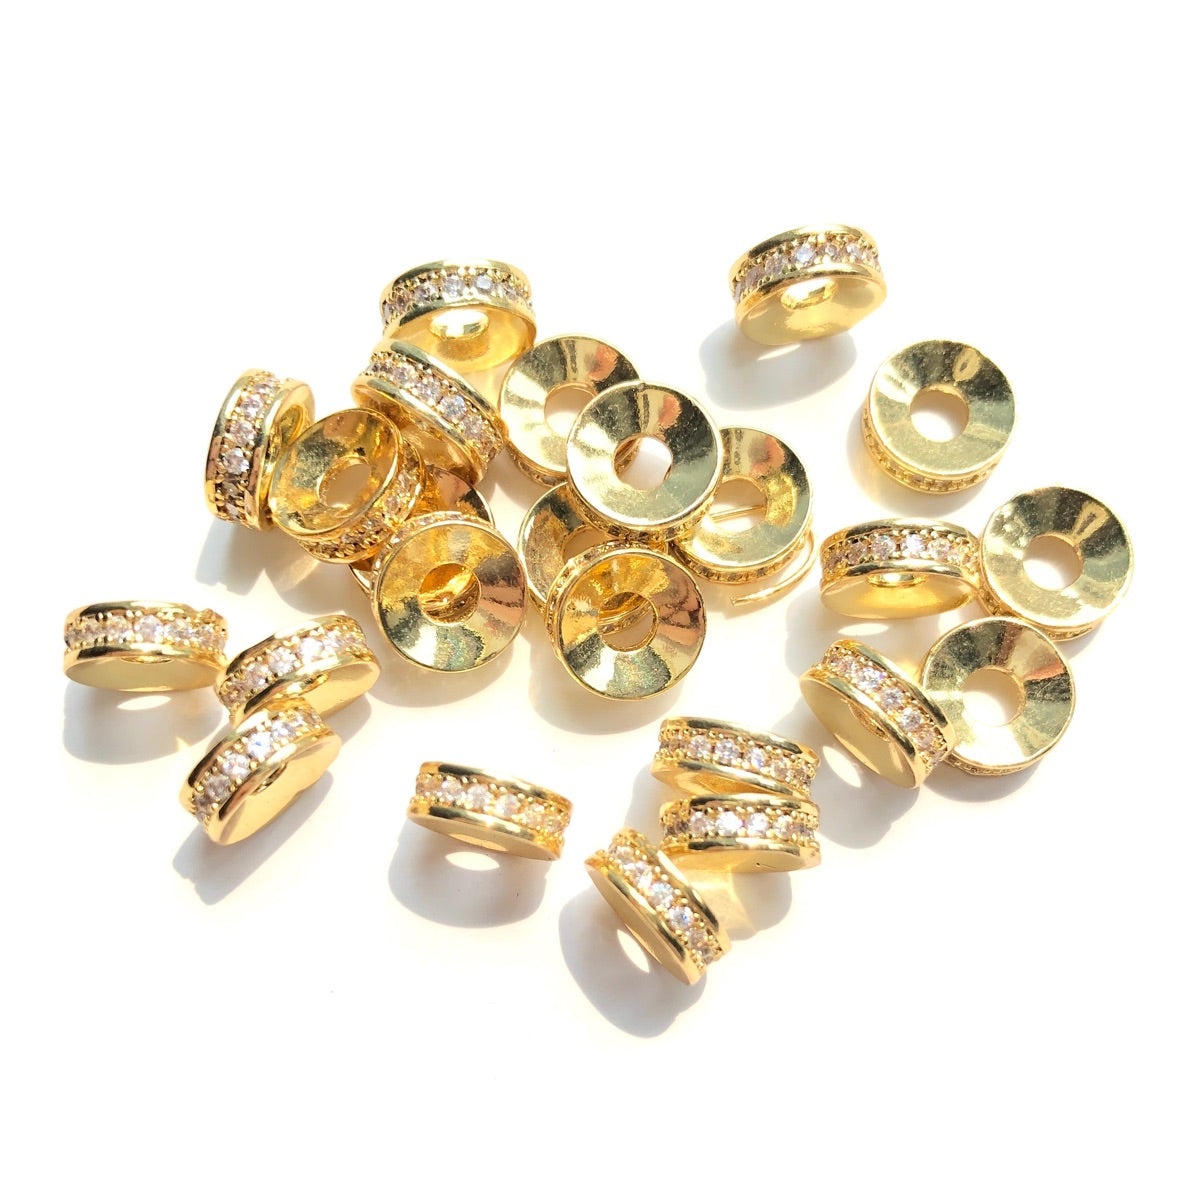 20-50pcs/lot 8*3mm CZ Paved Rondelle Wheel Spacers Gold CZ Paved Spacers Big Hole Beads New Spacers Arrivals Rondelle Beads Wholesale Charms Beads Beyond